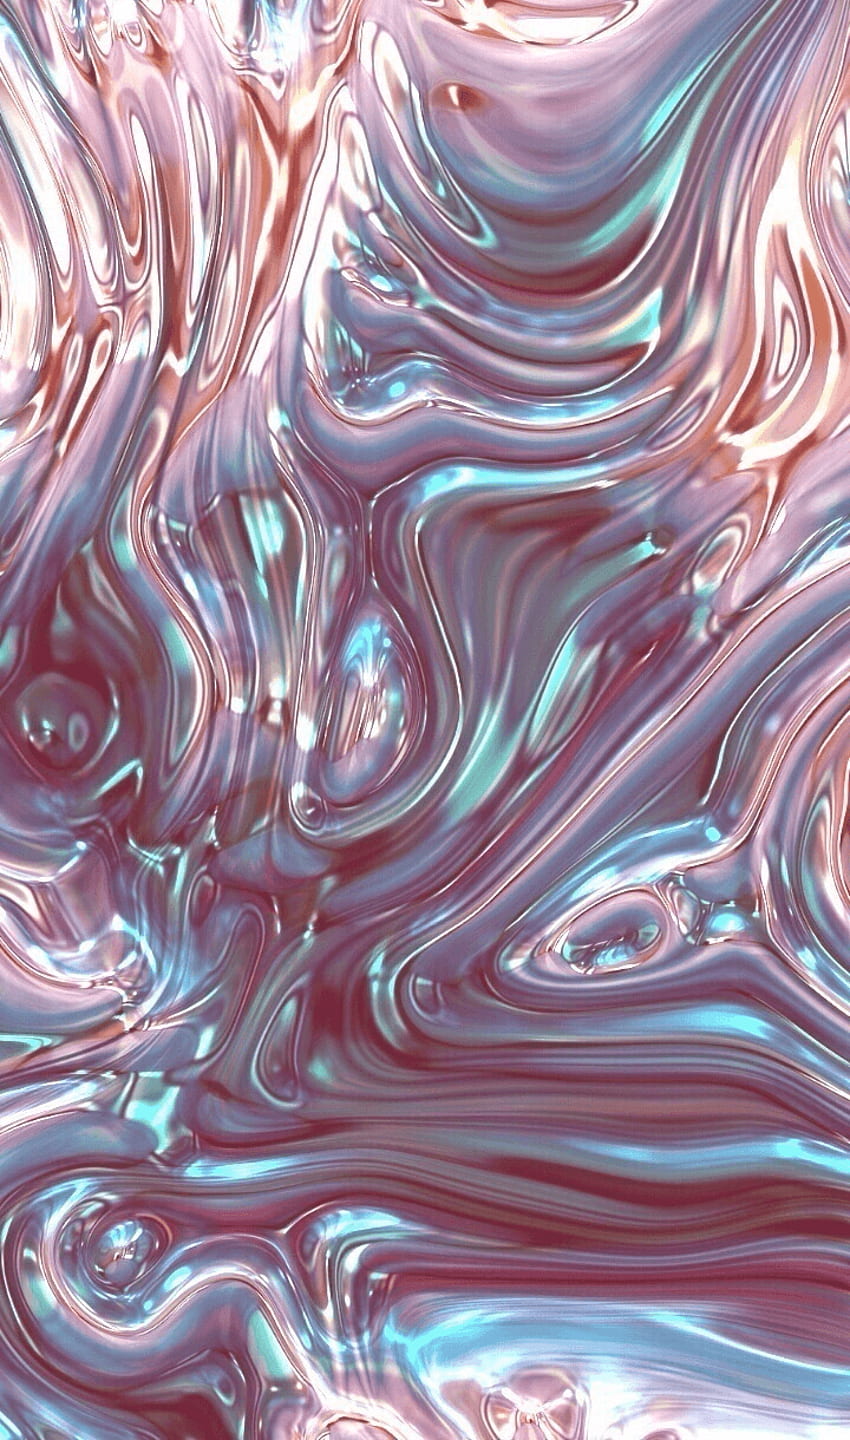 A close up of an abstract background with metallic colors - Slime